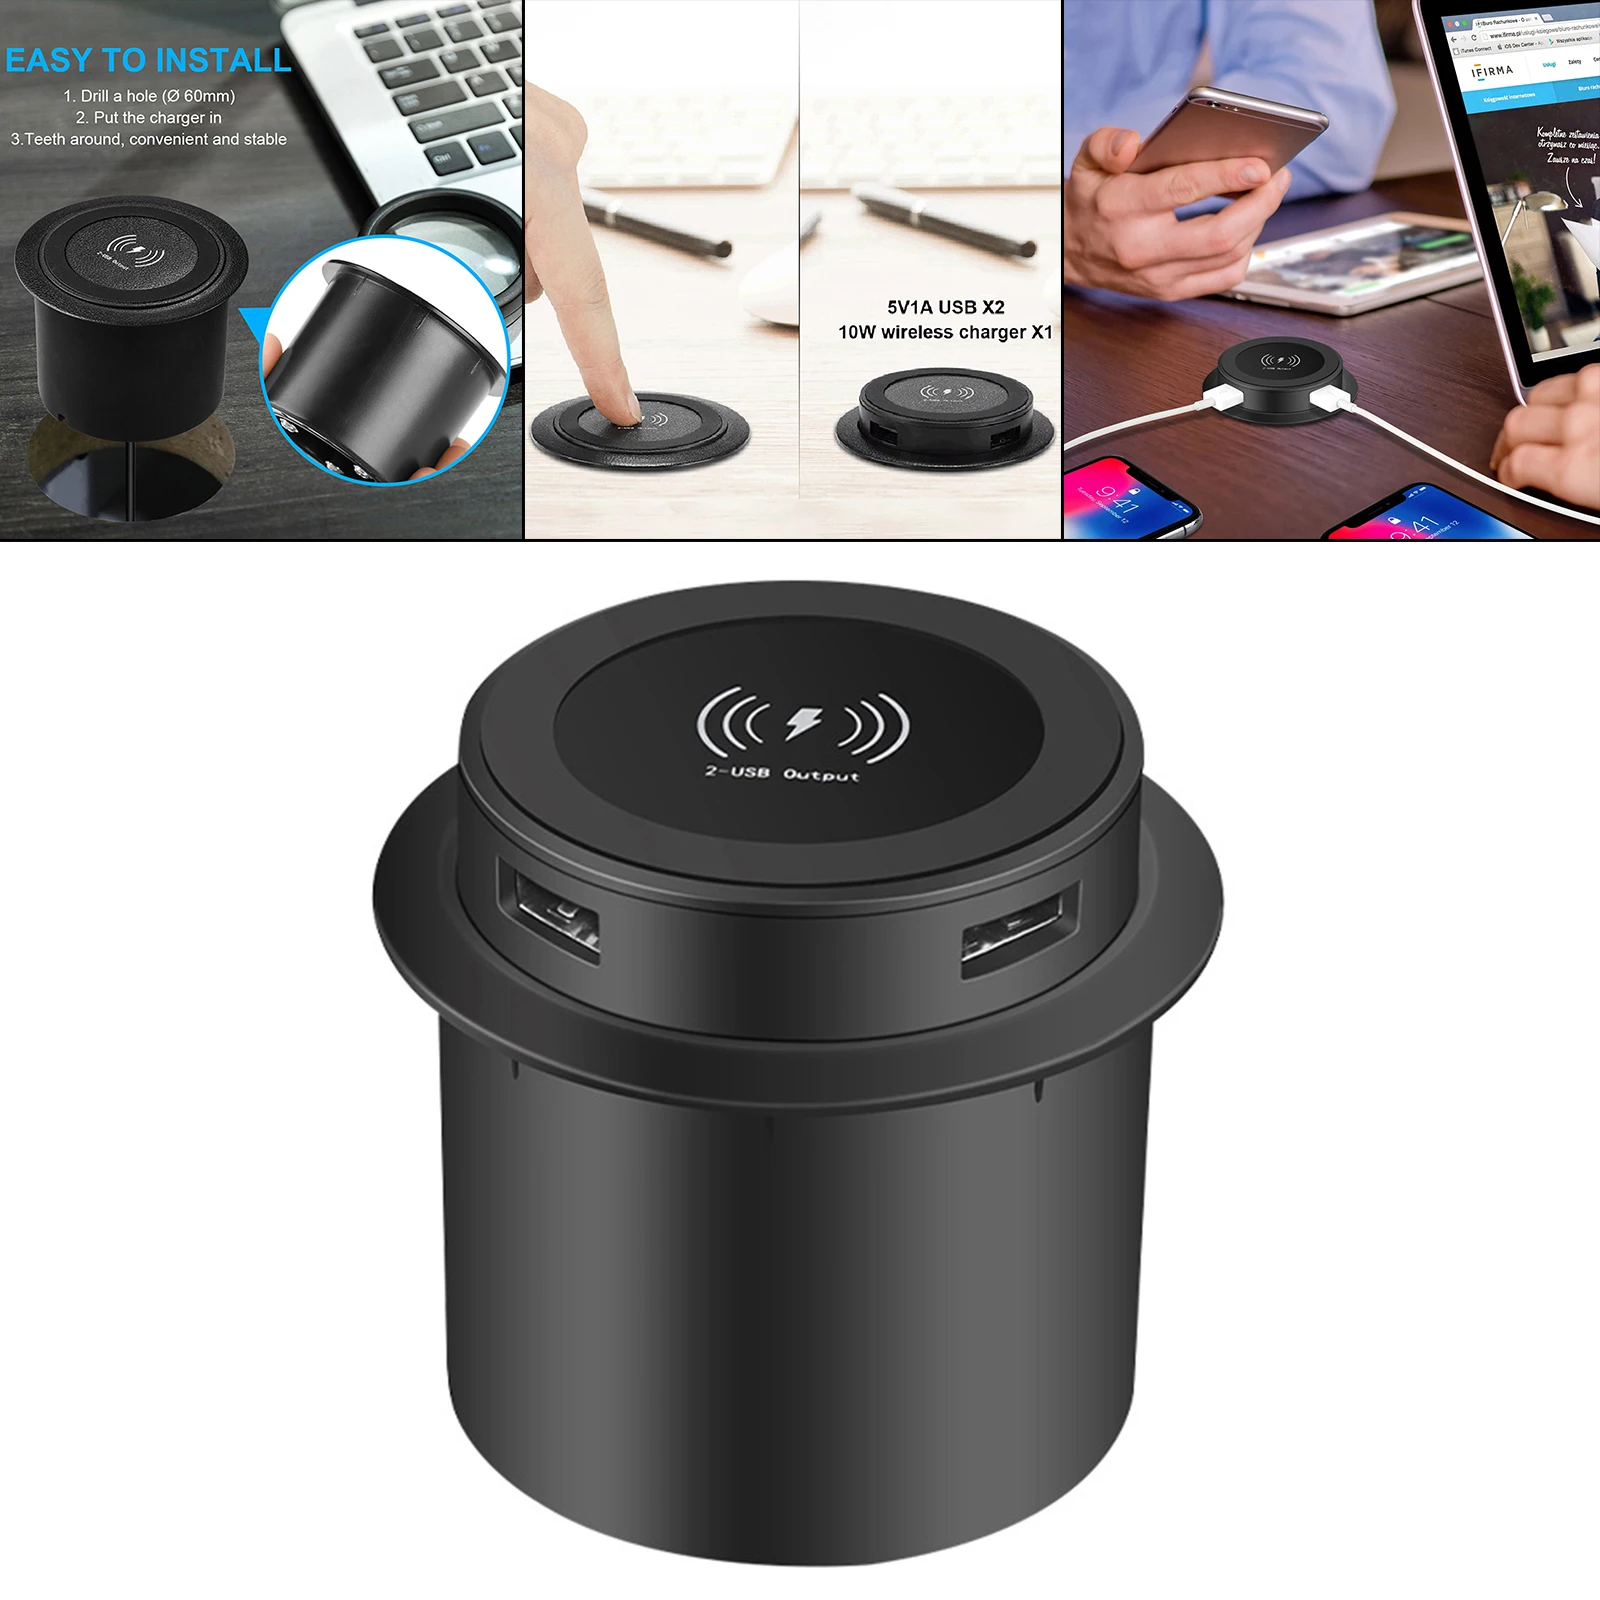 Qi Wireless Charger Universal Fast Charging Embedded for Desk Bedside Coffee Shop Cell Phones Earphone